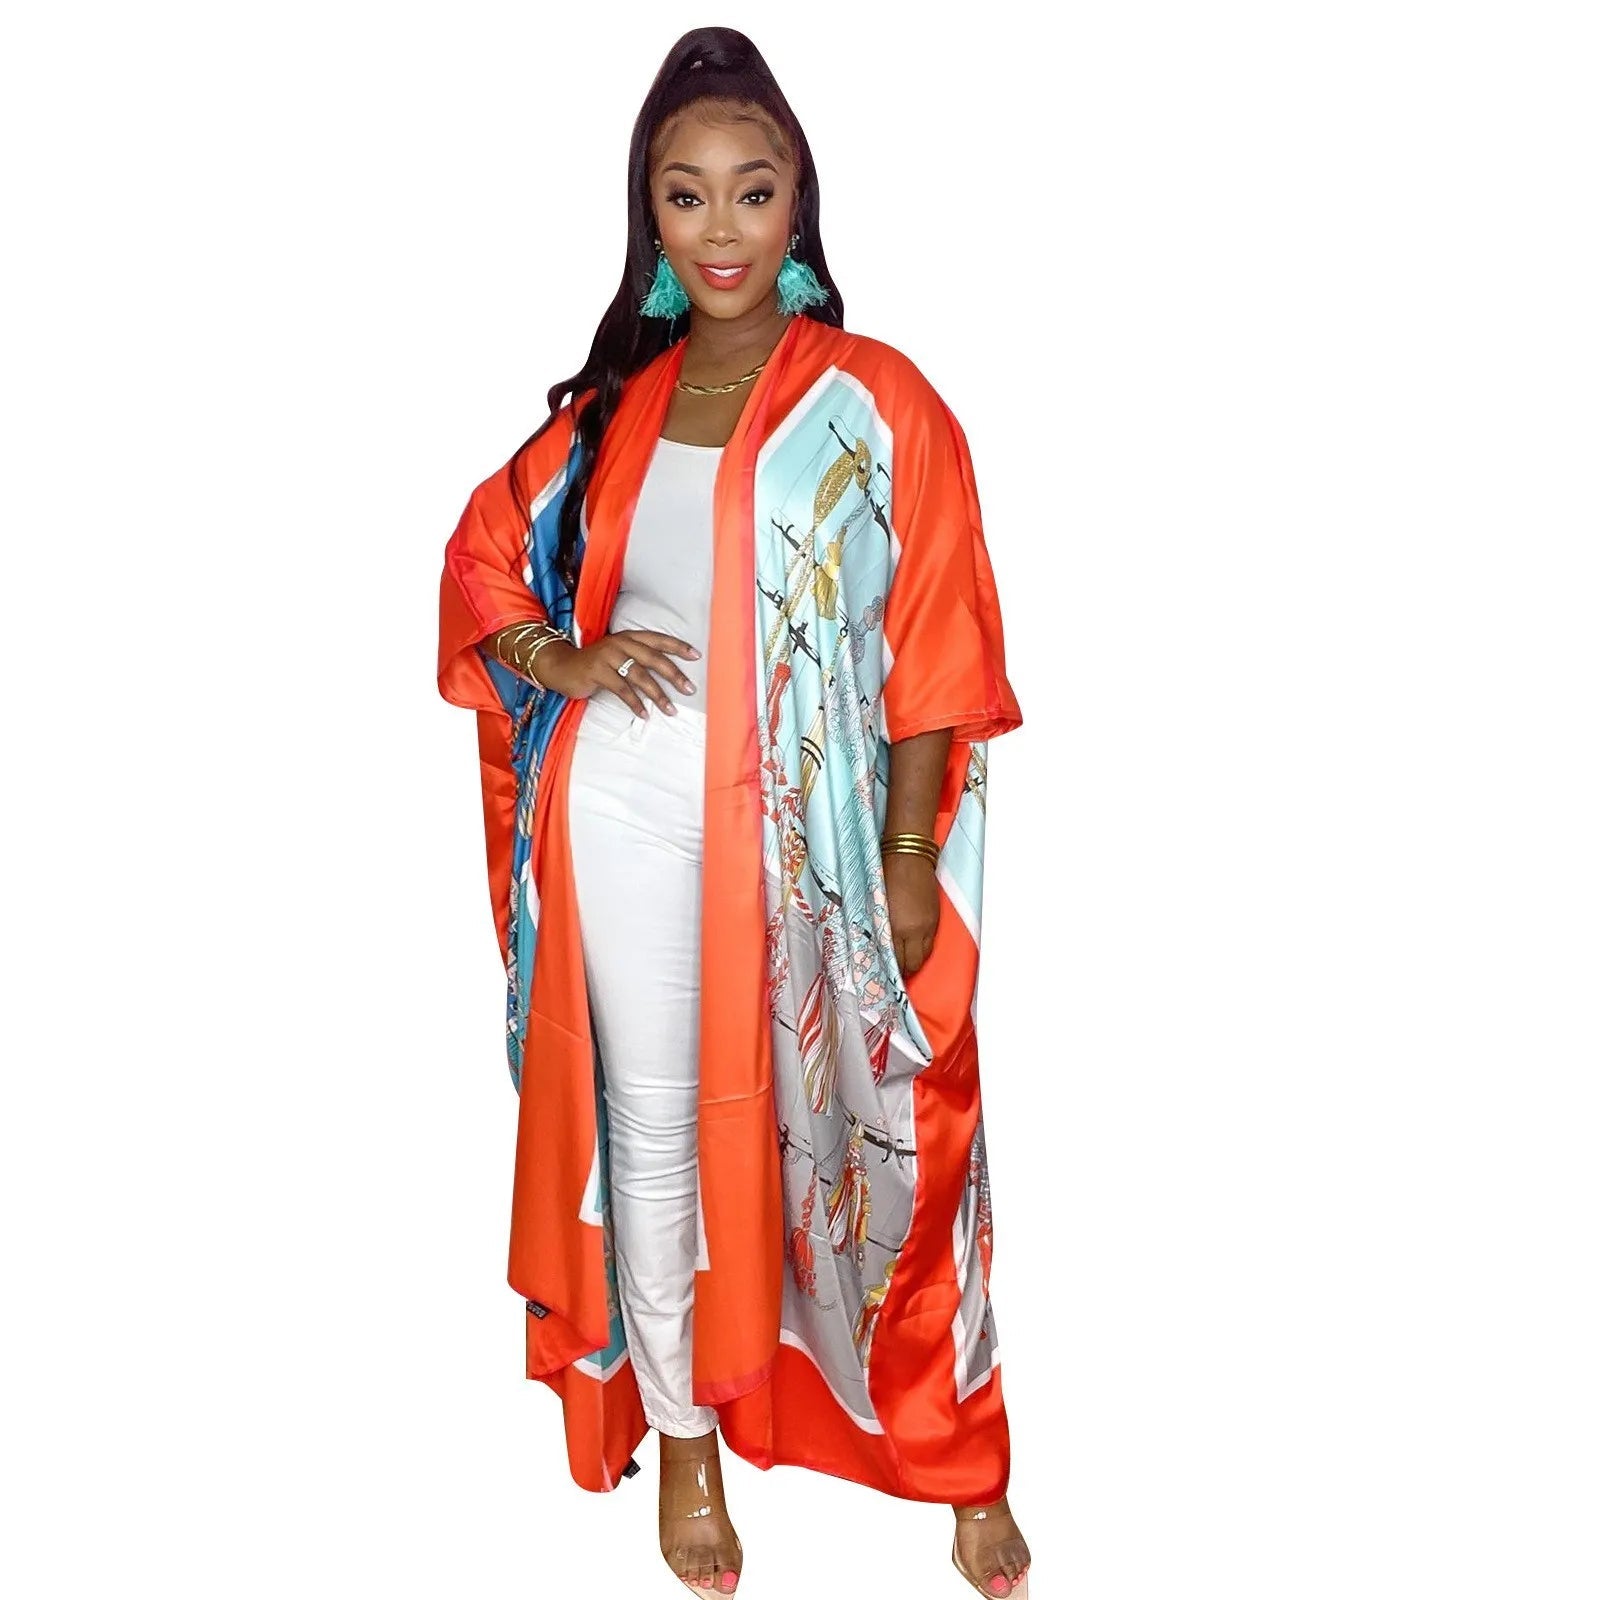 Bohemian Printed Beach Cover Up Kimono for Women - Vintage Style Bikini and Bathing Suit Wraps - Flexi Africa - Free Delivery Worldwide only at www.flexiafrica.com